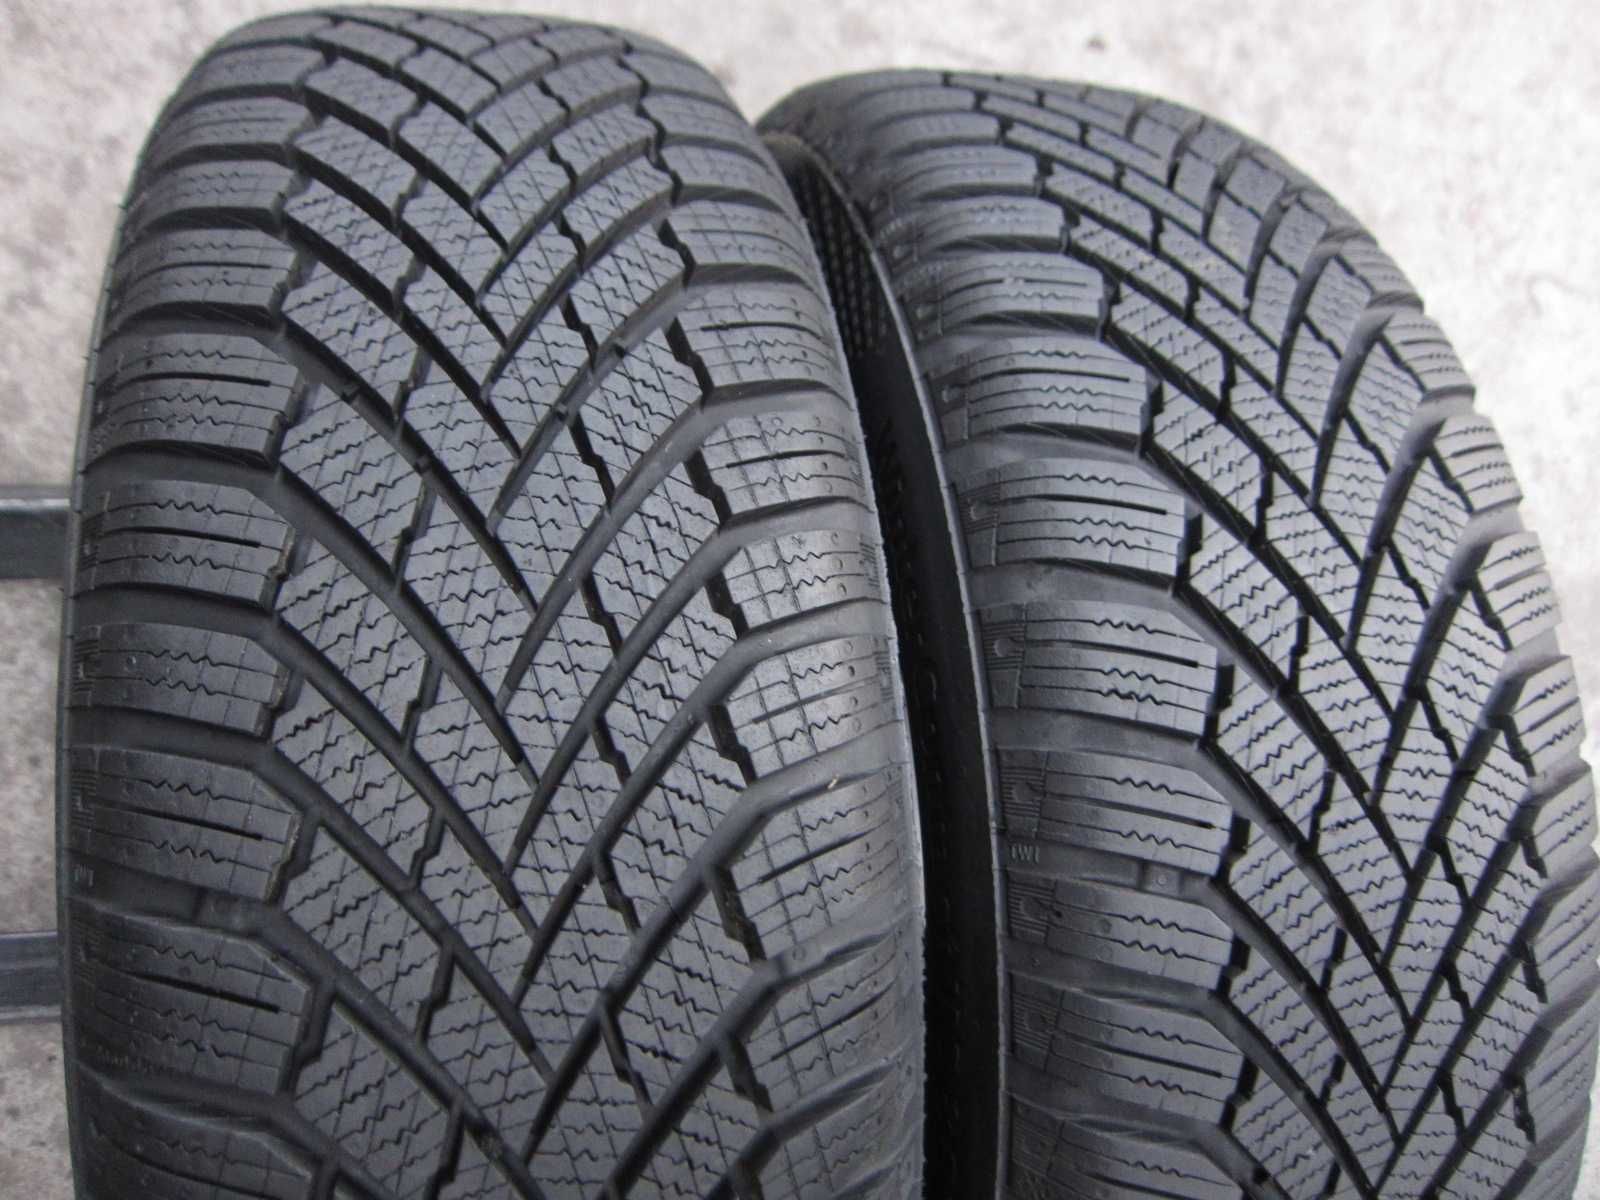 2x Continental Winter Contact TS860   185/60r15  8mm